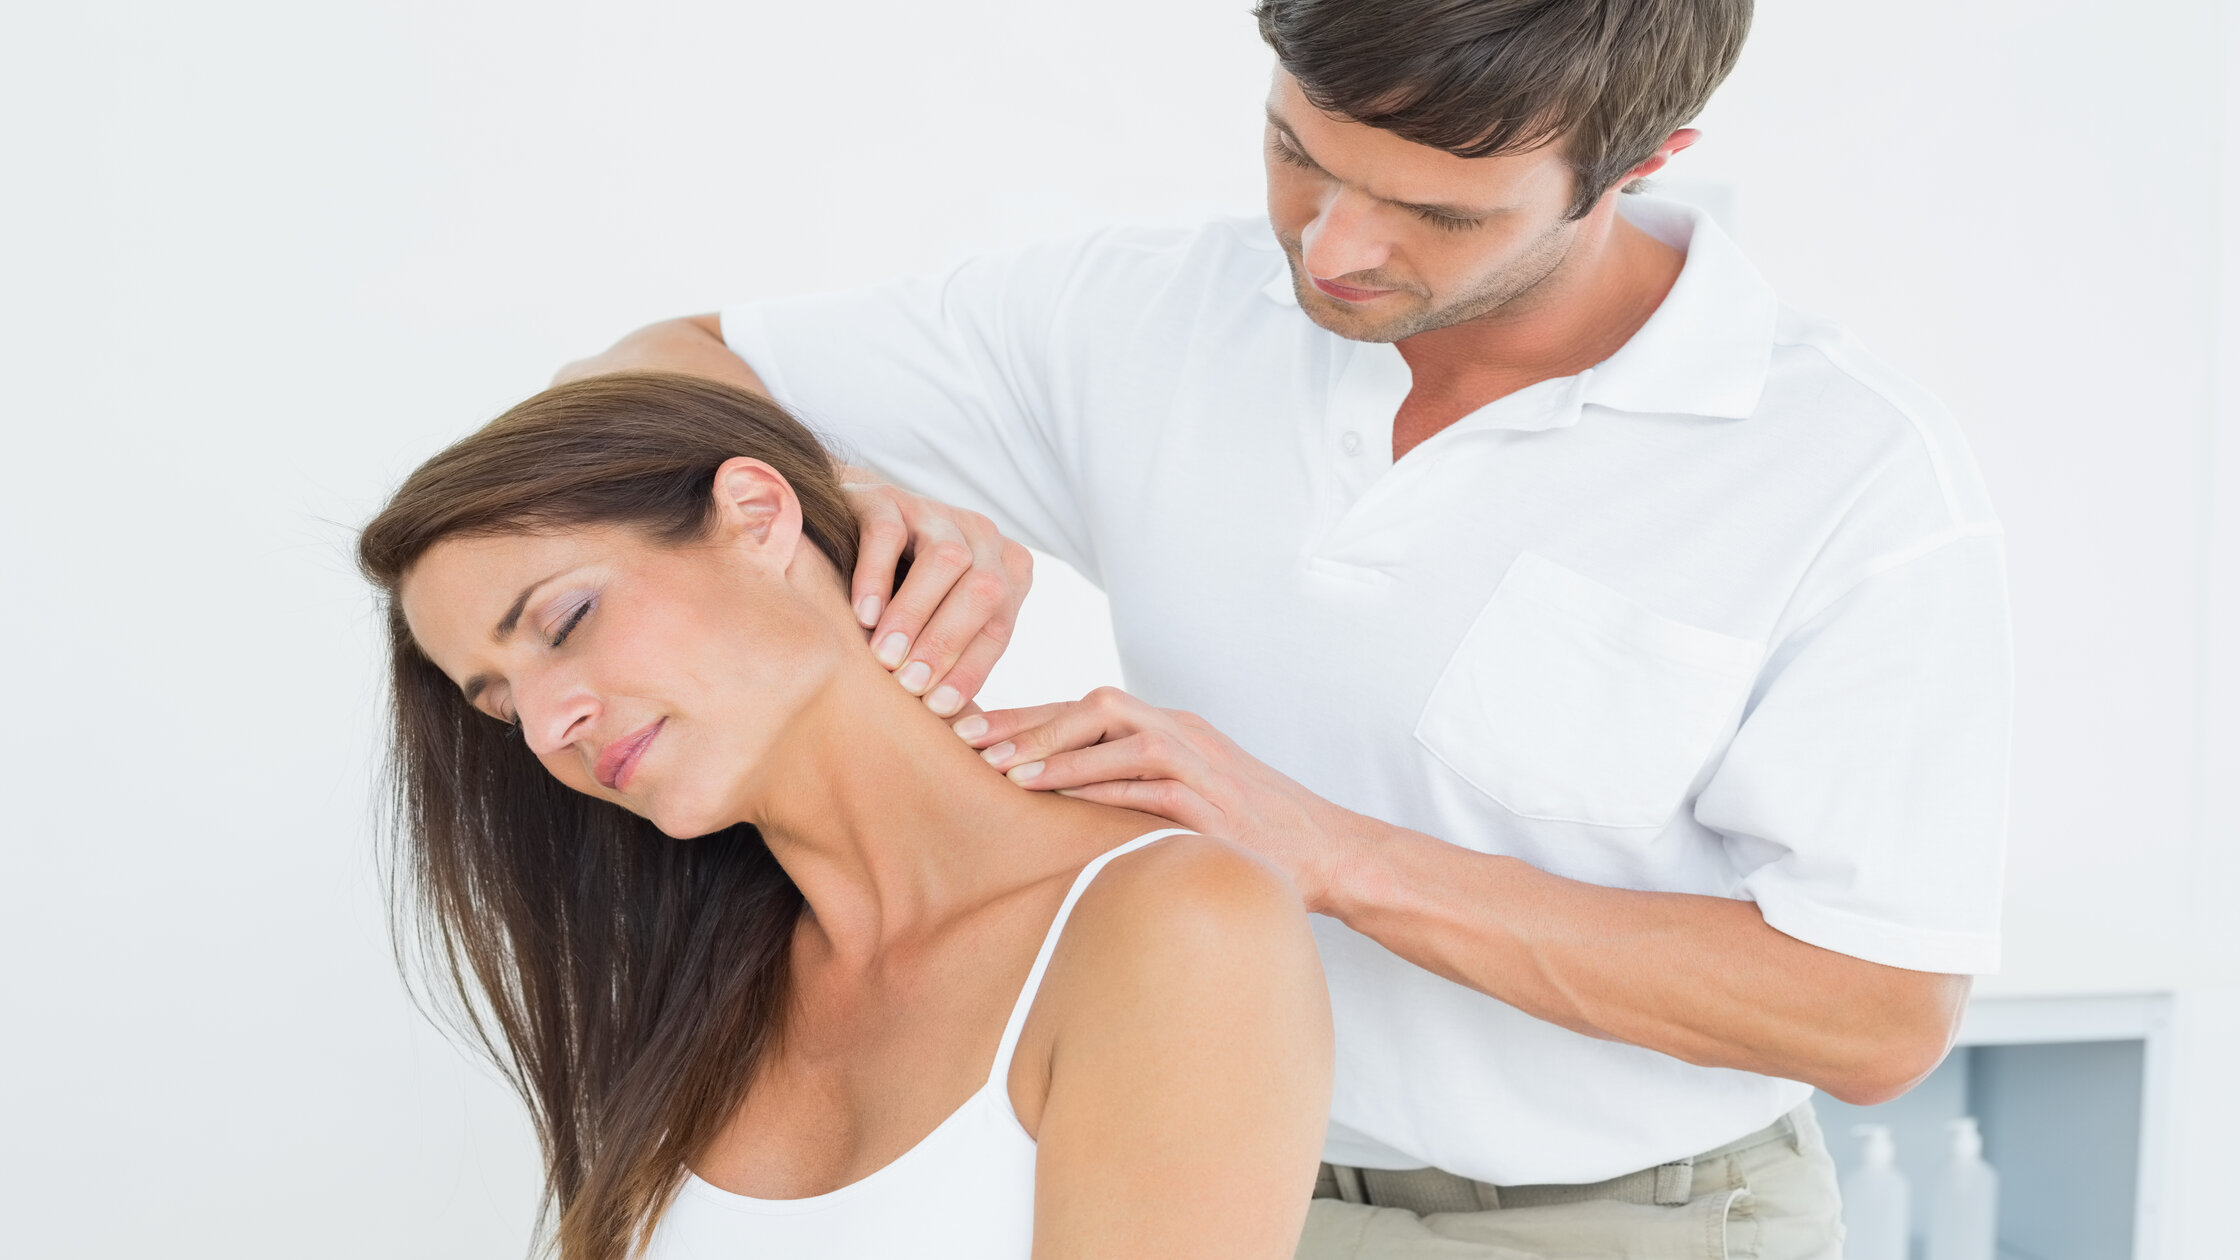 A Guide to Alleviating Neck Pain Through Chiropractic Care